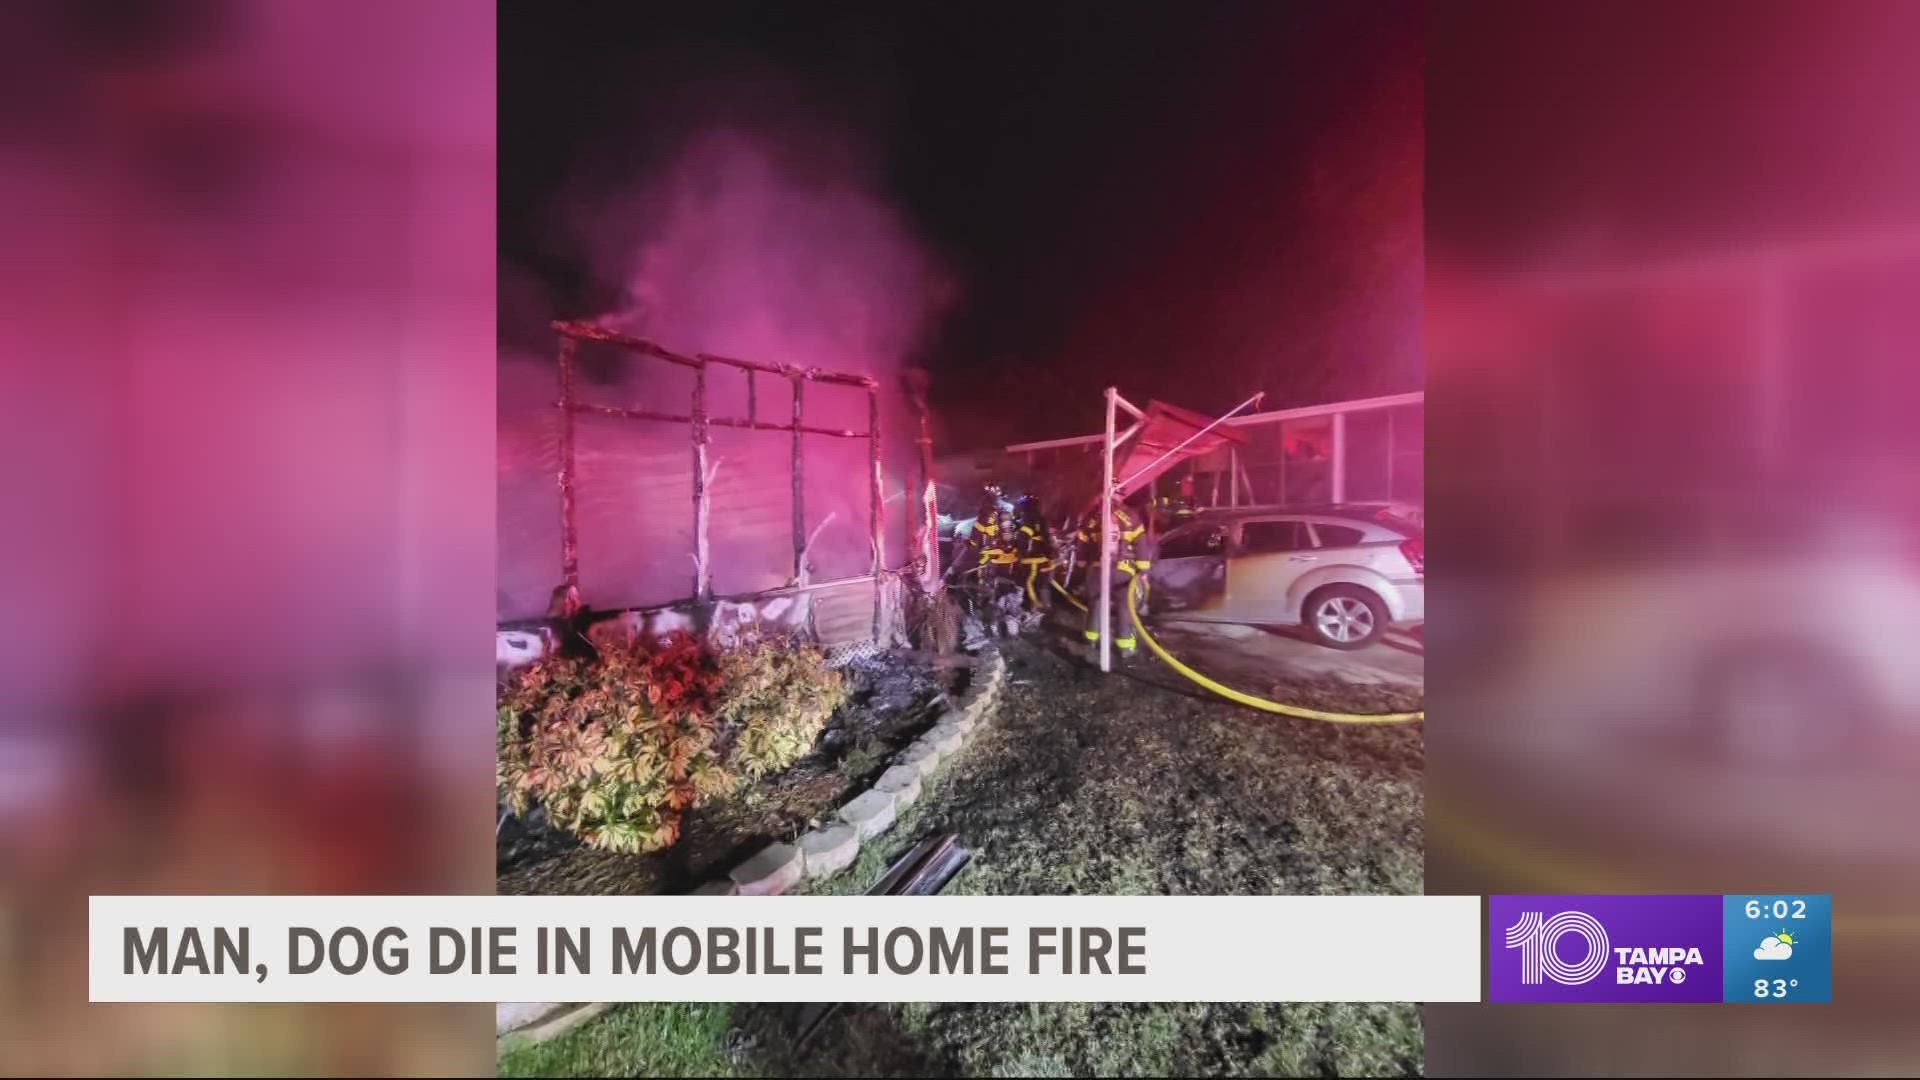 The home was completely engulfed in flames when first responders arrived. No hydrants were reportedly within the community.